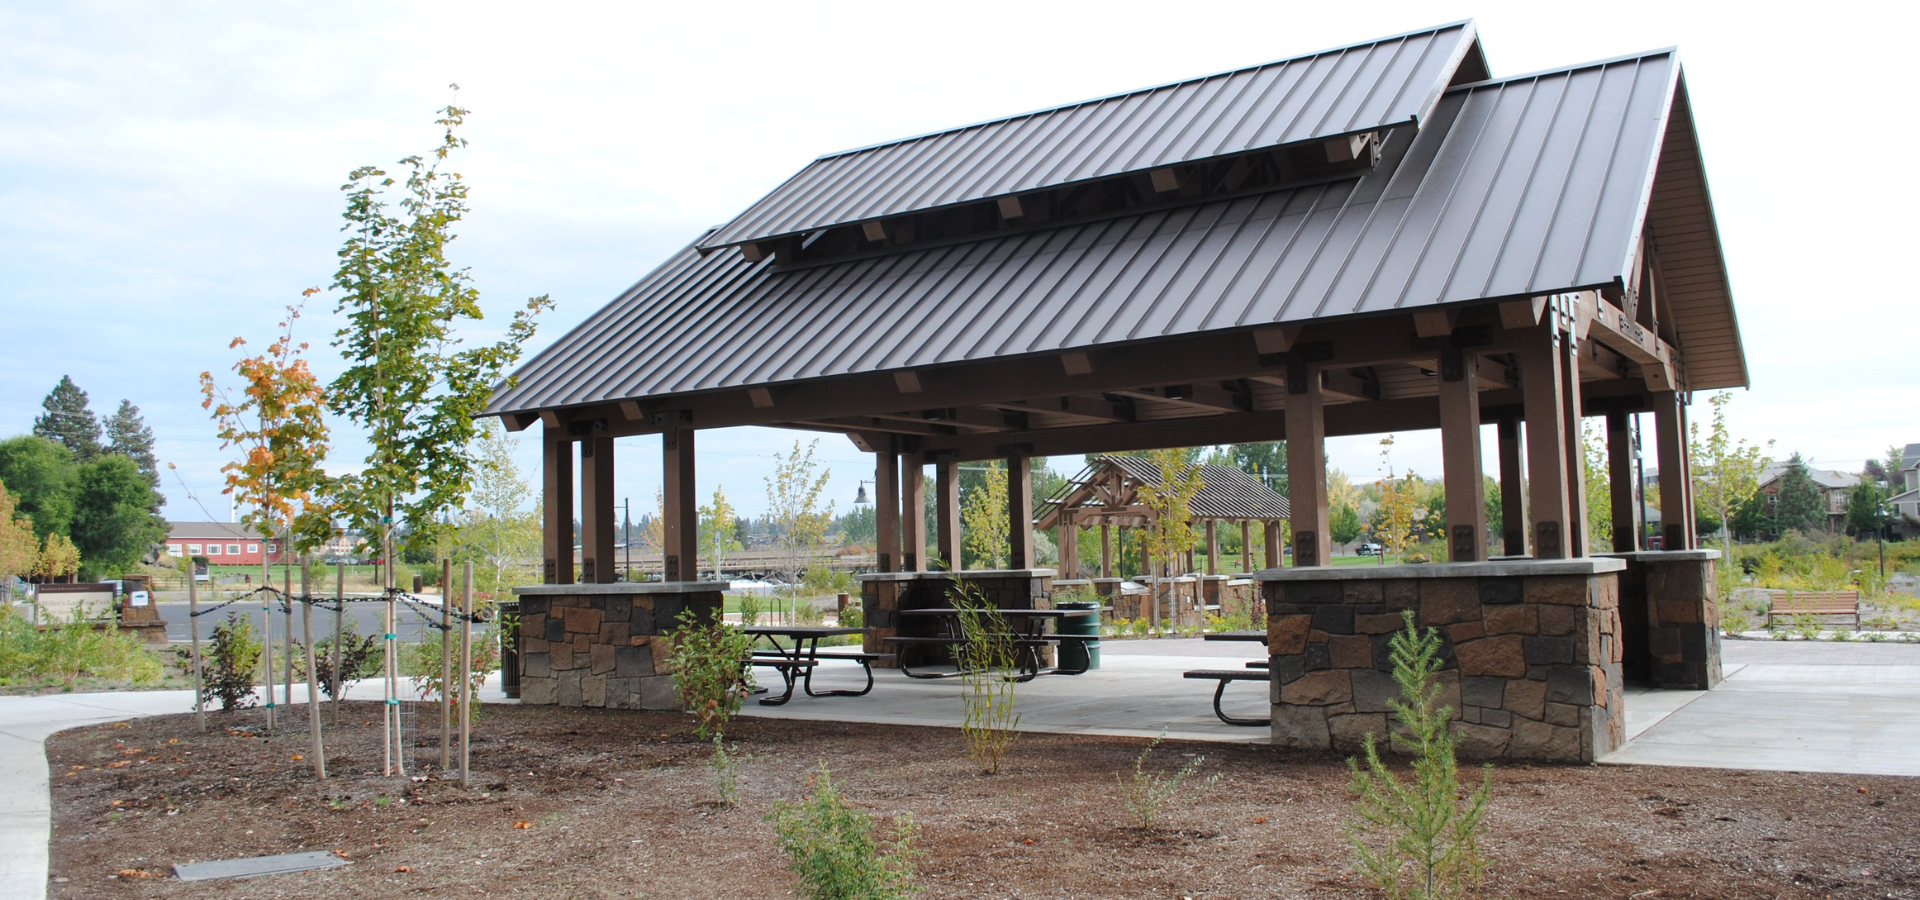 Miller's Landing picnic shelter with landscaping in the foreground